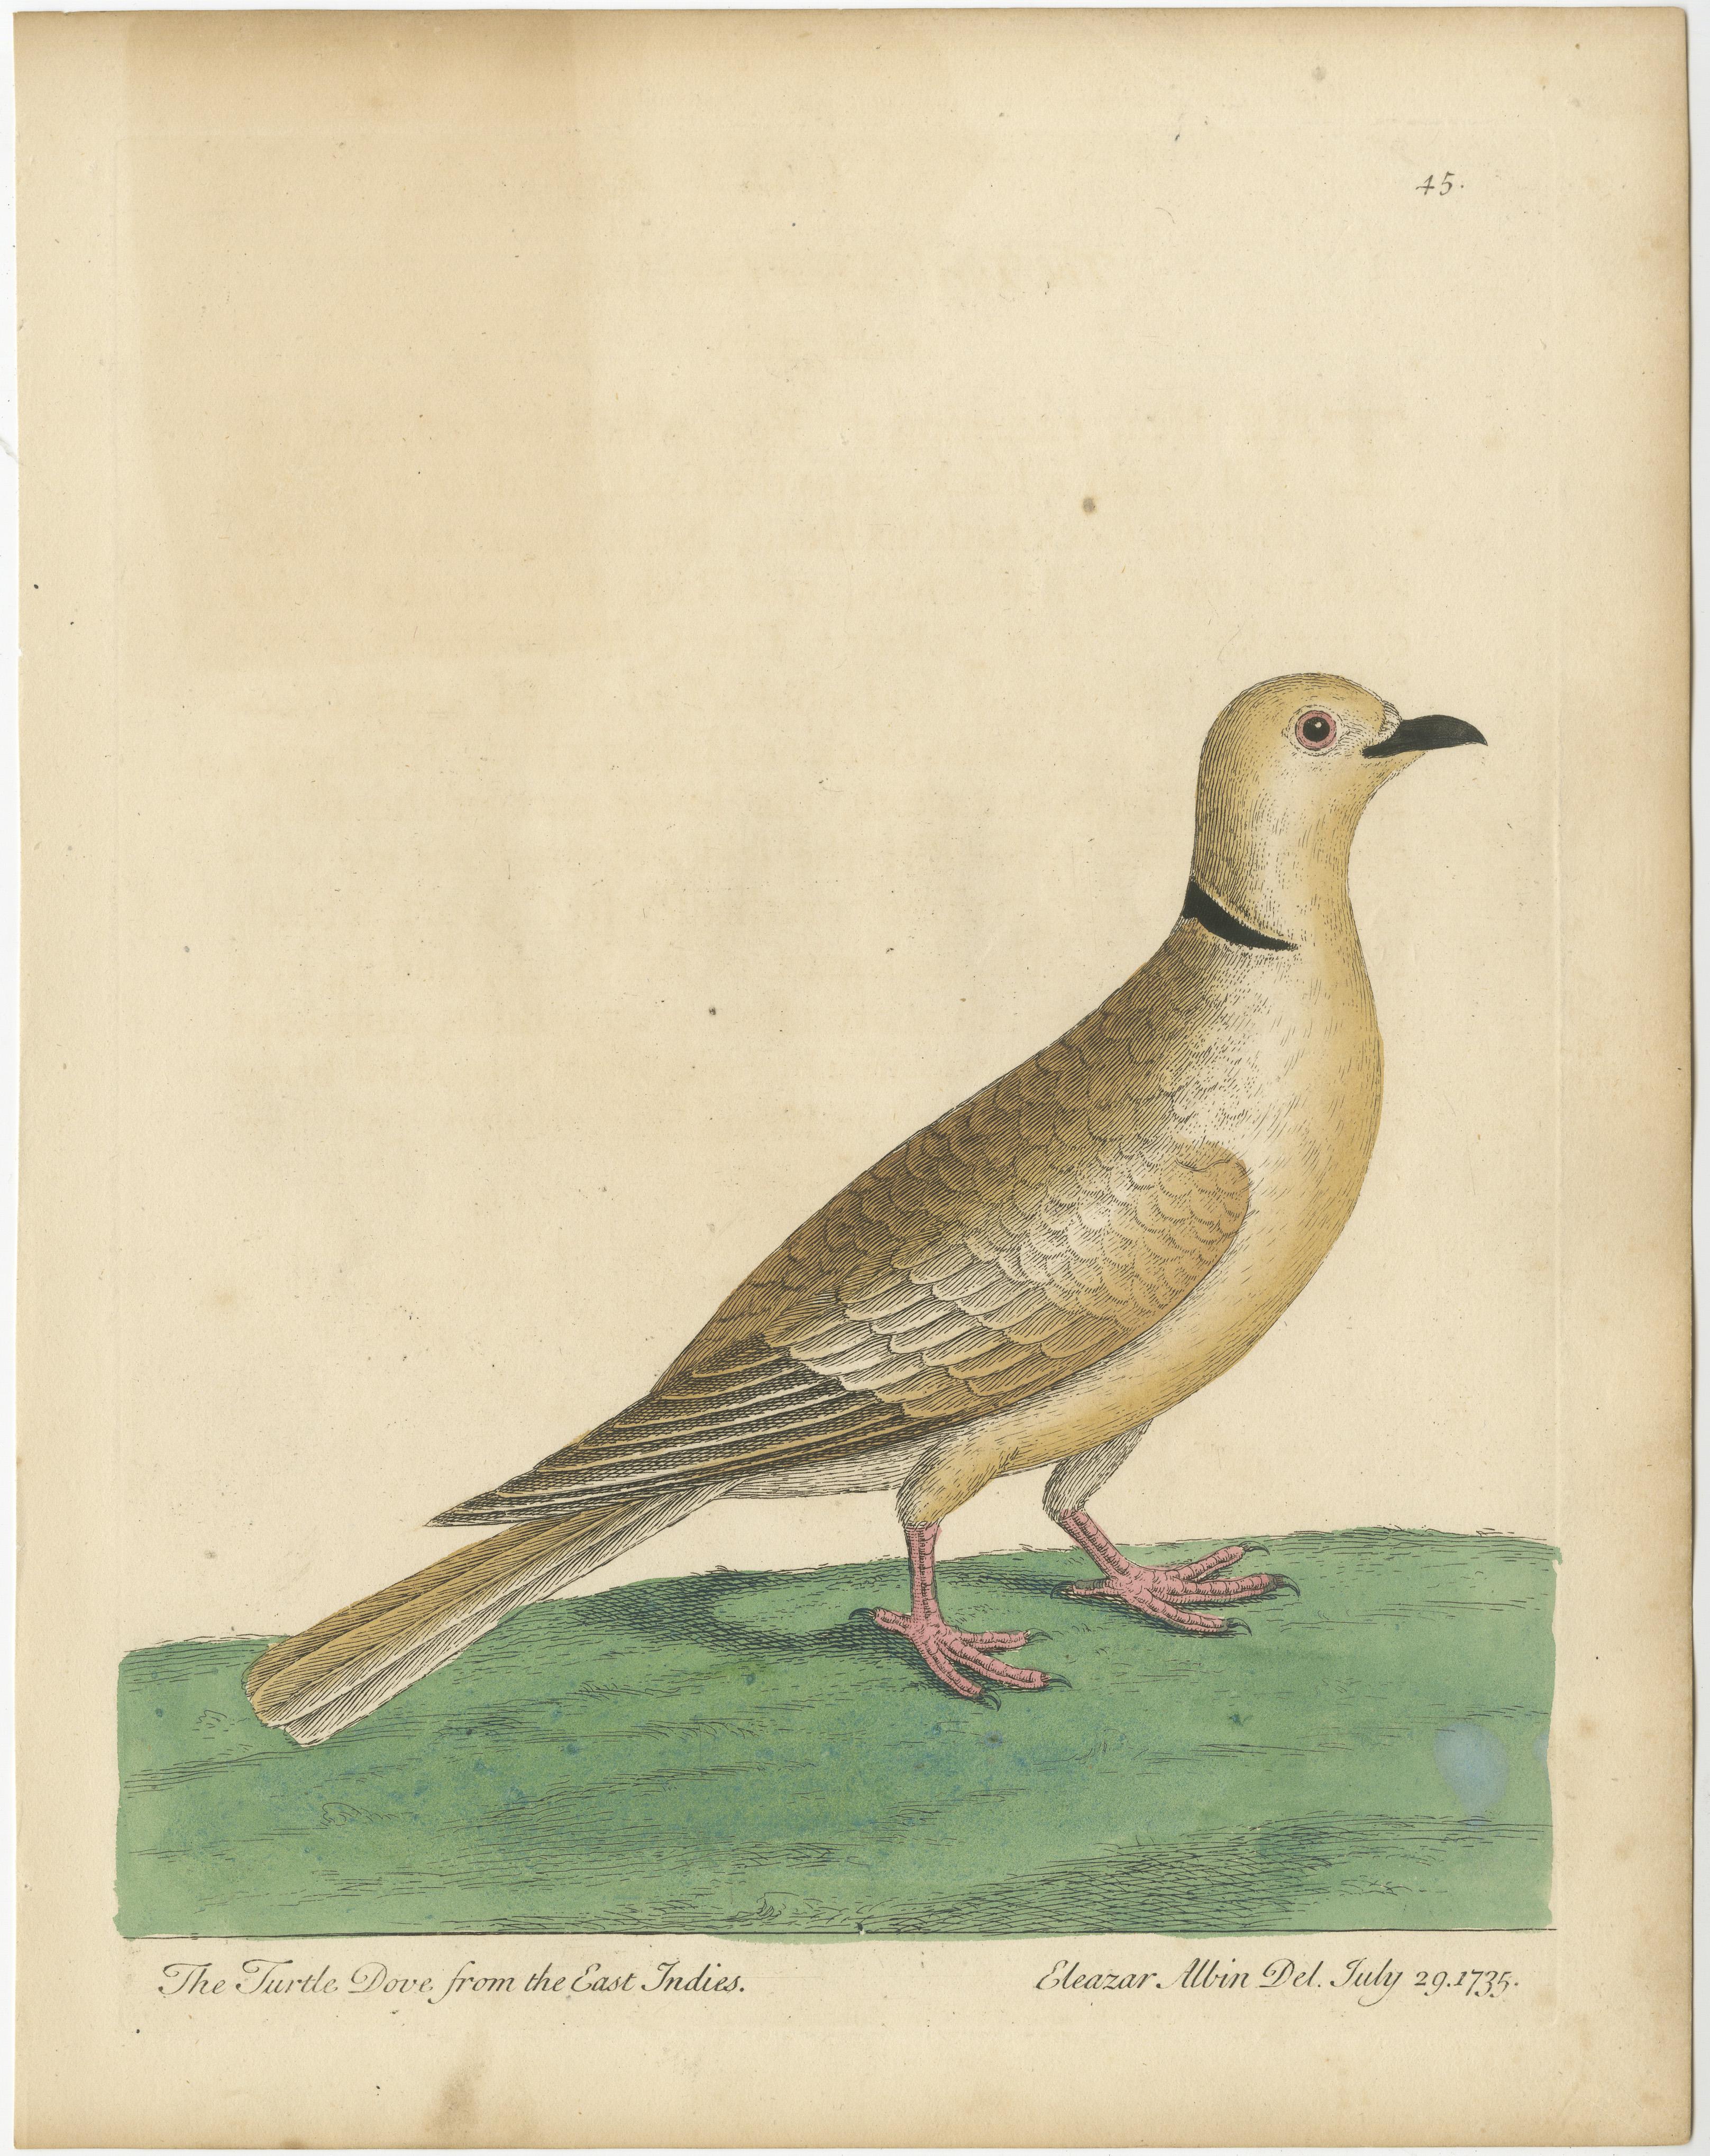 Antique bird print titled 'The Turtle Dove from the East Indies'. Original antique print of a turtle dove from the East Indies. This print originates from 'A Supplement to the Natural History of Birds illustrated with an Hundred and One Copper